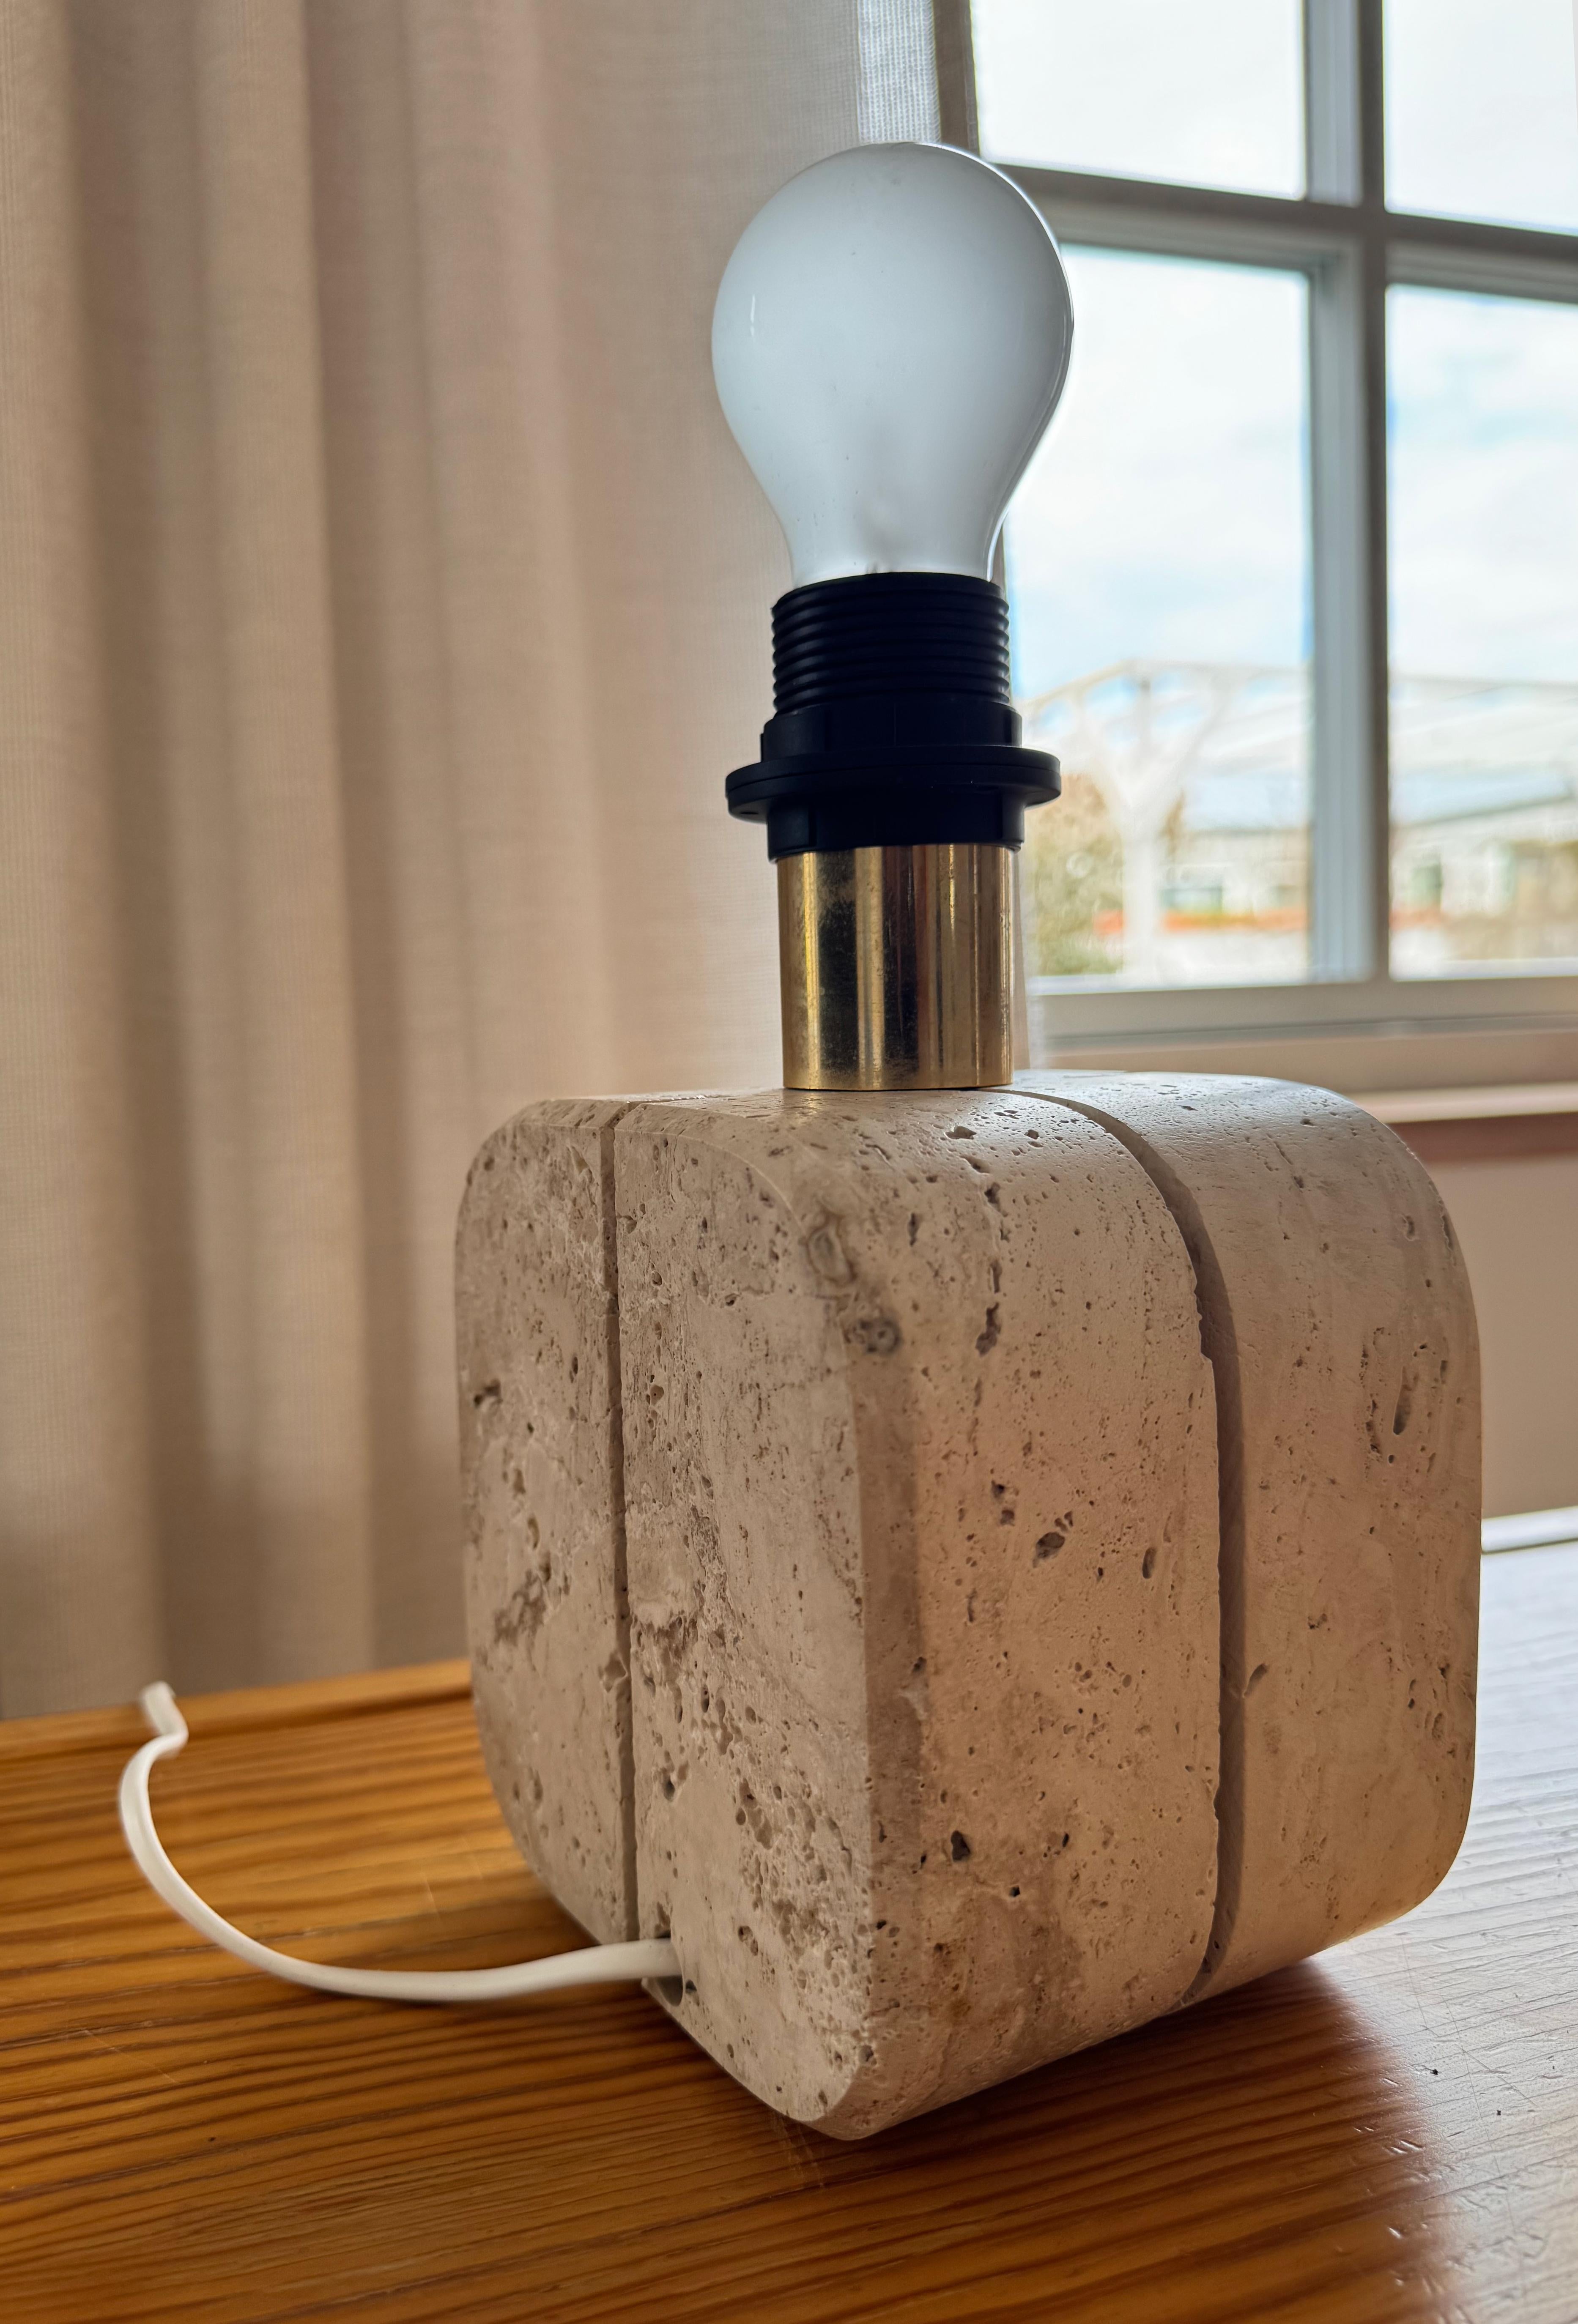 The Cerri Nestore Table Lamp in Travertine, crafted in the 1970s in Italy, exudes bold elegance. Each piece features meticulous groove detailing cut into the travertine. The design blend classic craftsmanship with modern functionality. The lamp